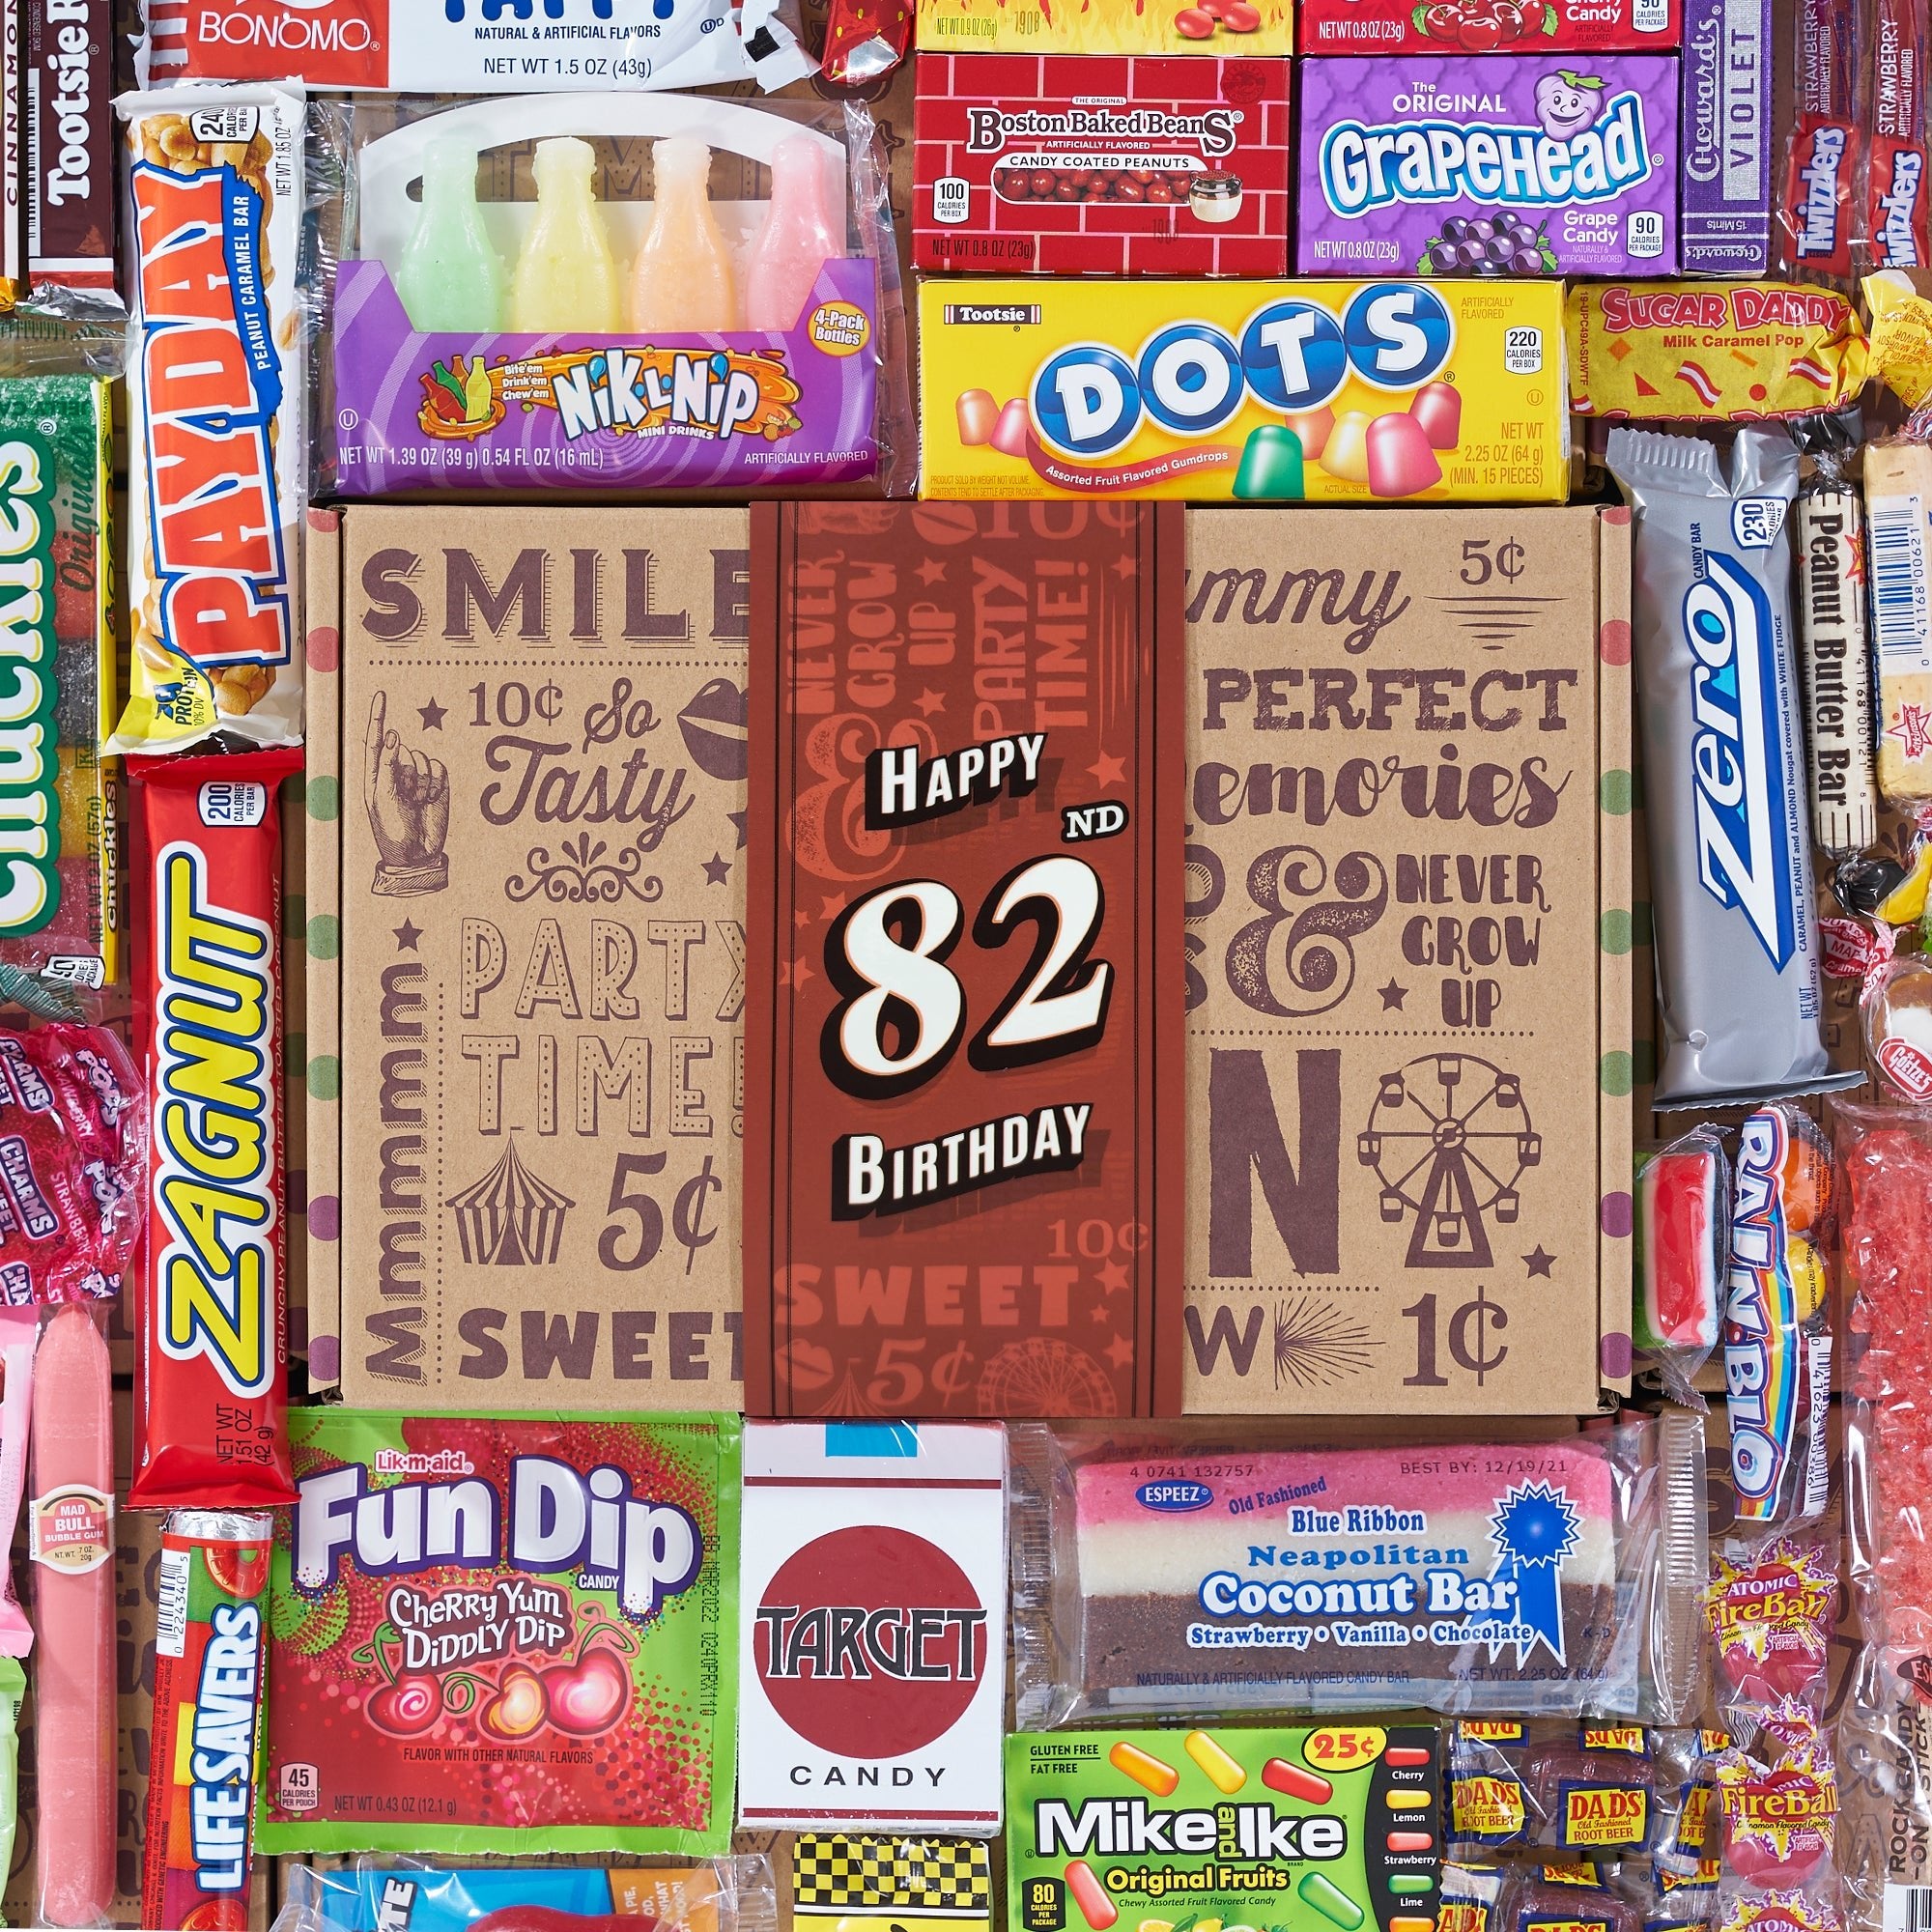 82nd Birthday Retro Candy Gift - Vintage Candy Co.